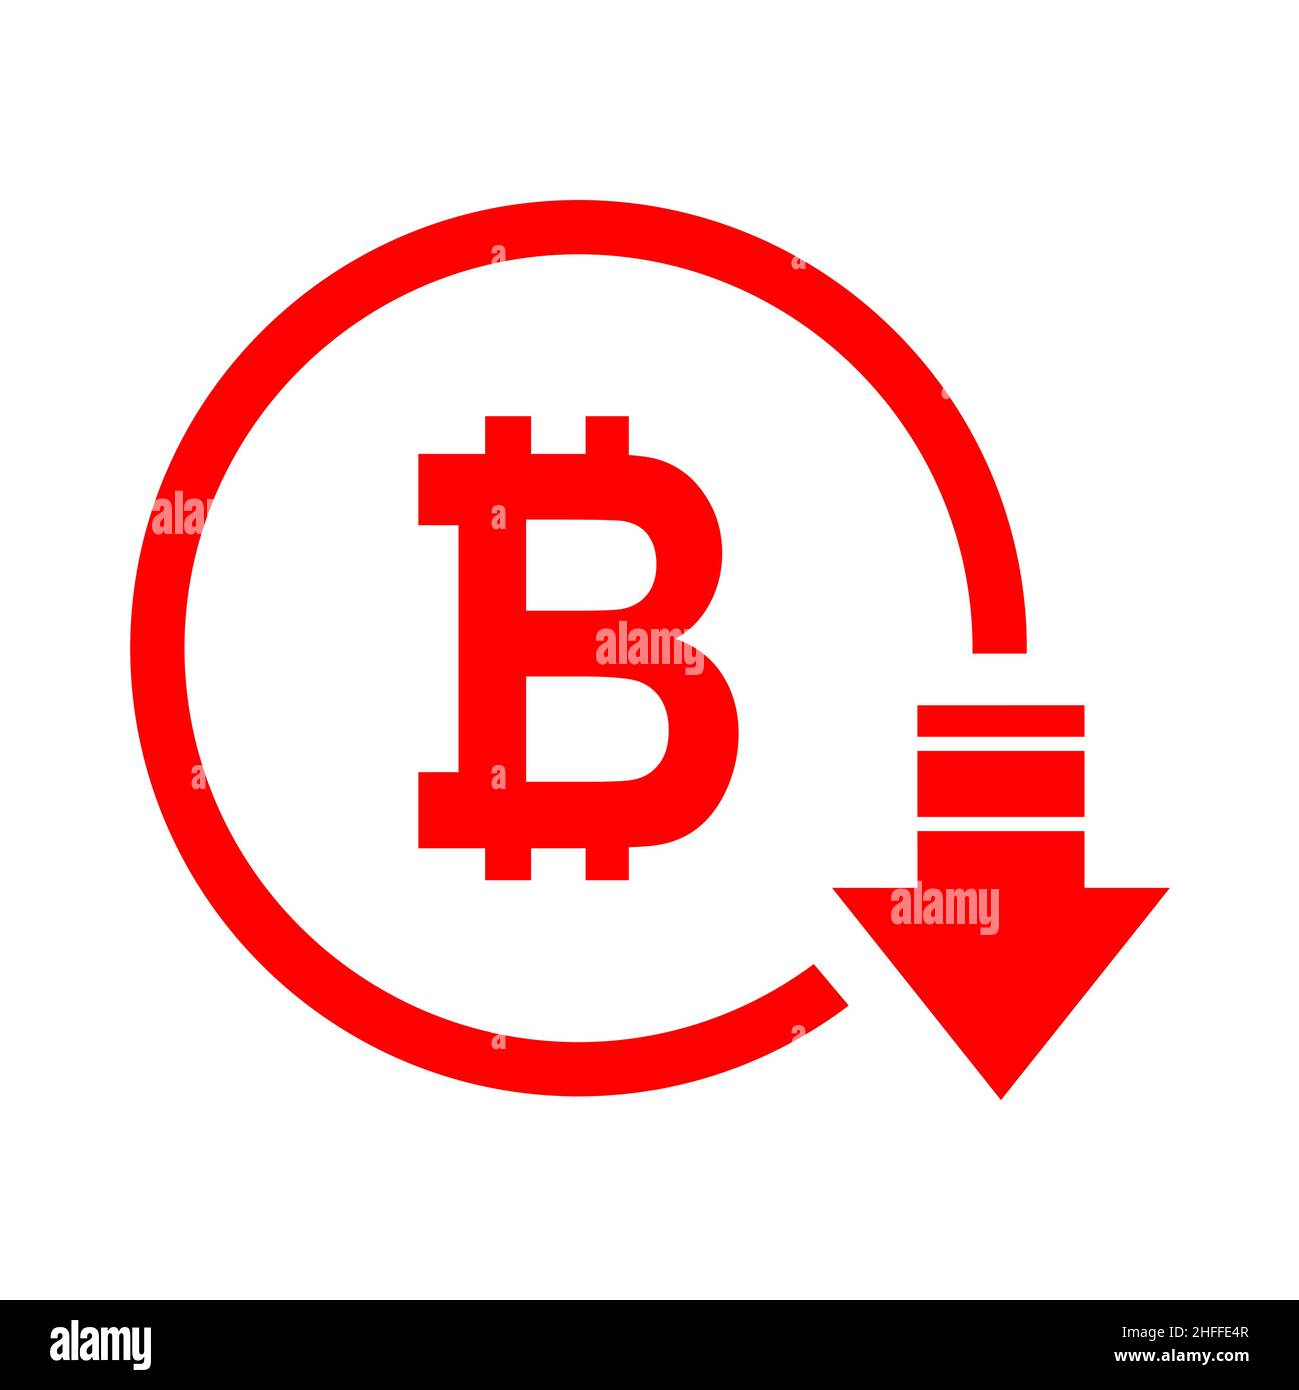 Bitcoin reduction symbol, cost decrease icon. Reduce debt bussiness sign vector illustration . Stock Vector